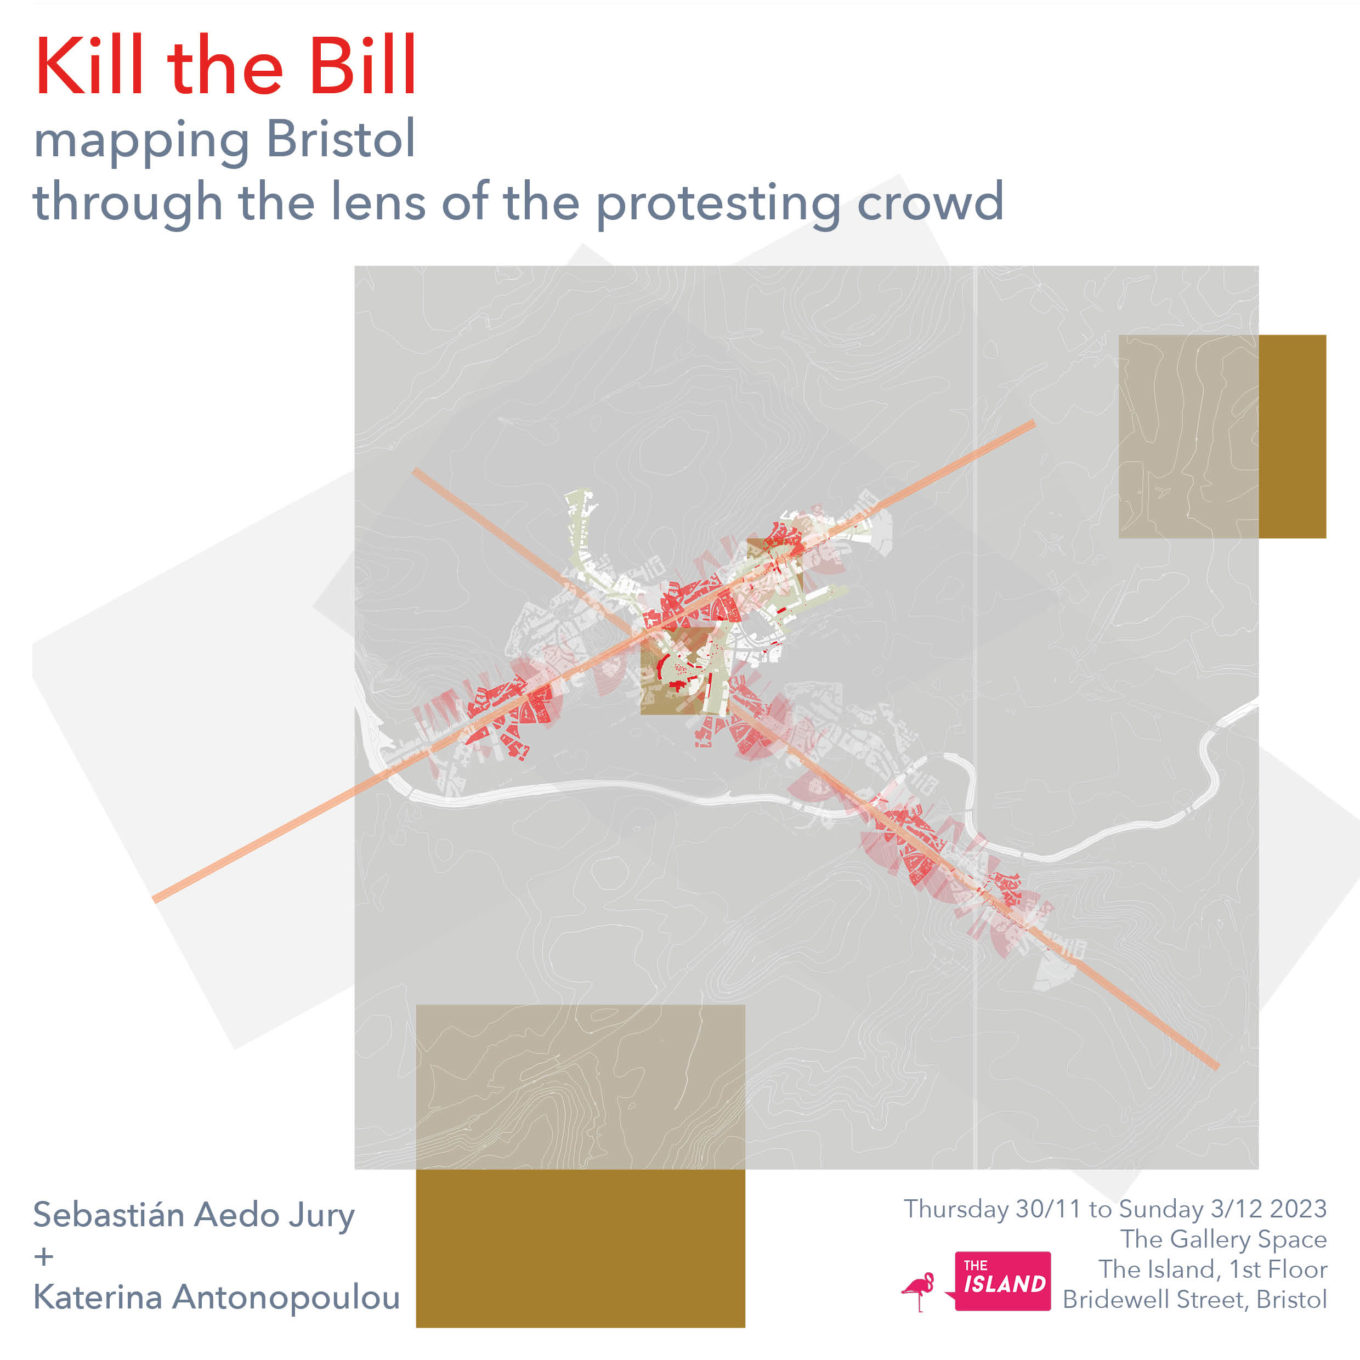 Poster for the Kill The Bill exhibition featuring a map of central Bristol